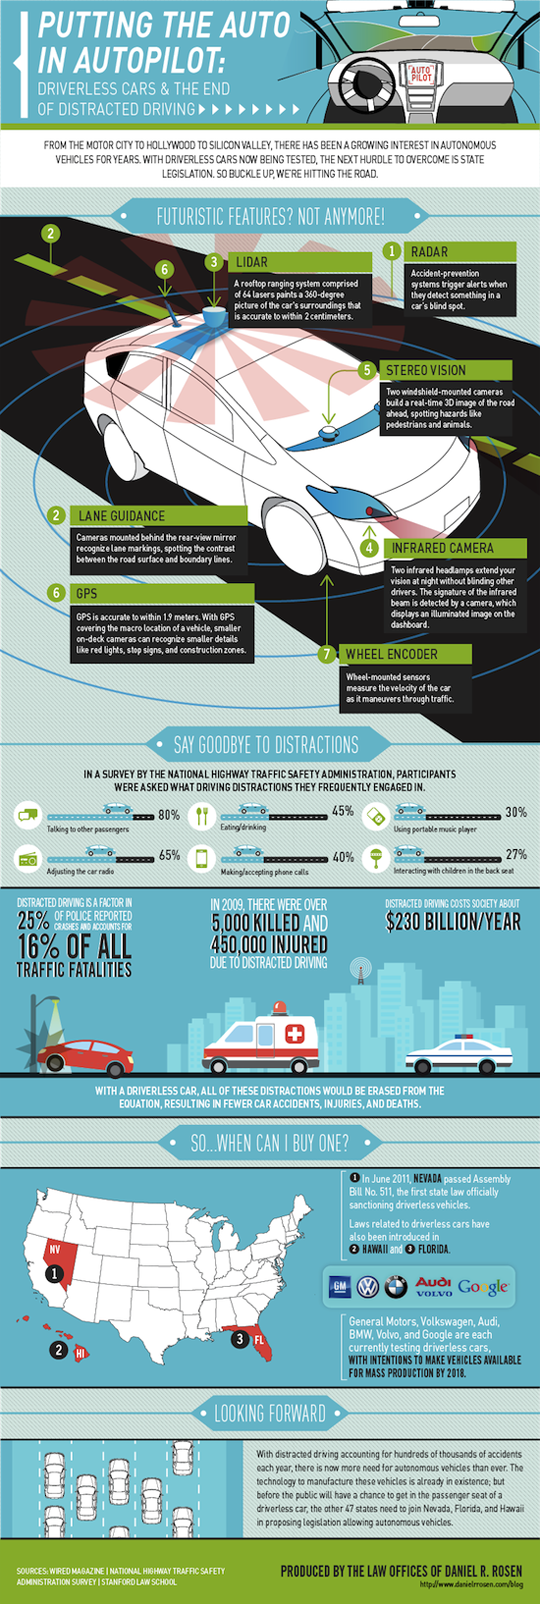 Driverless Cars and Distracted Driving Infographic